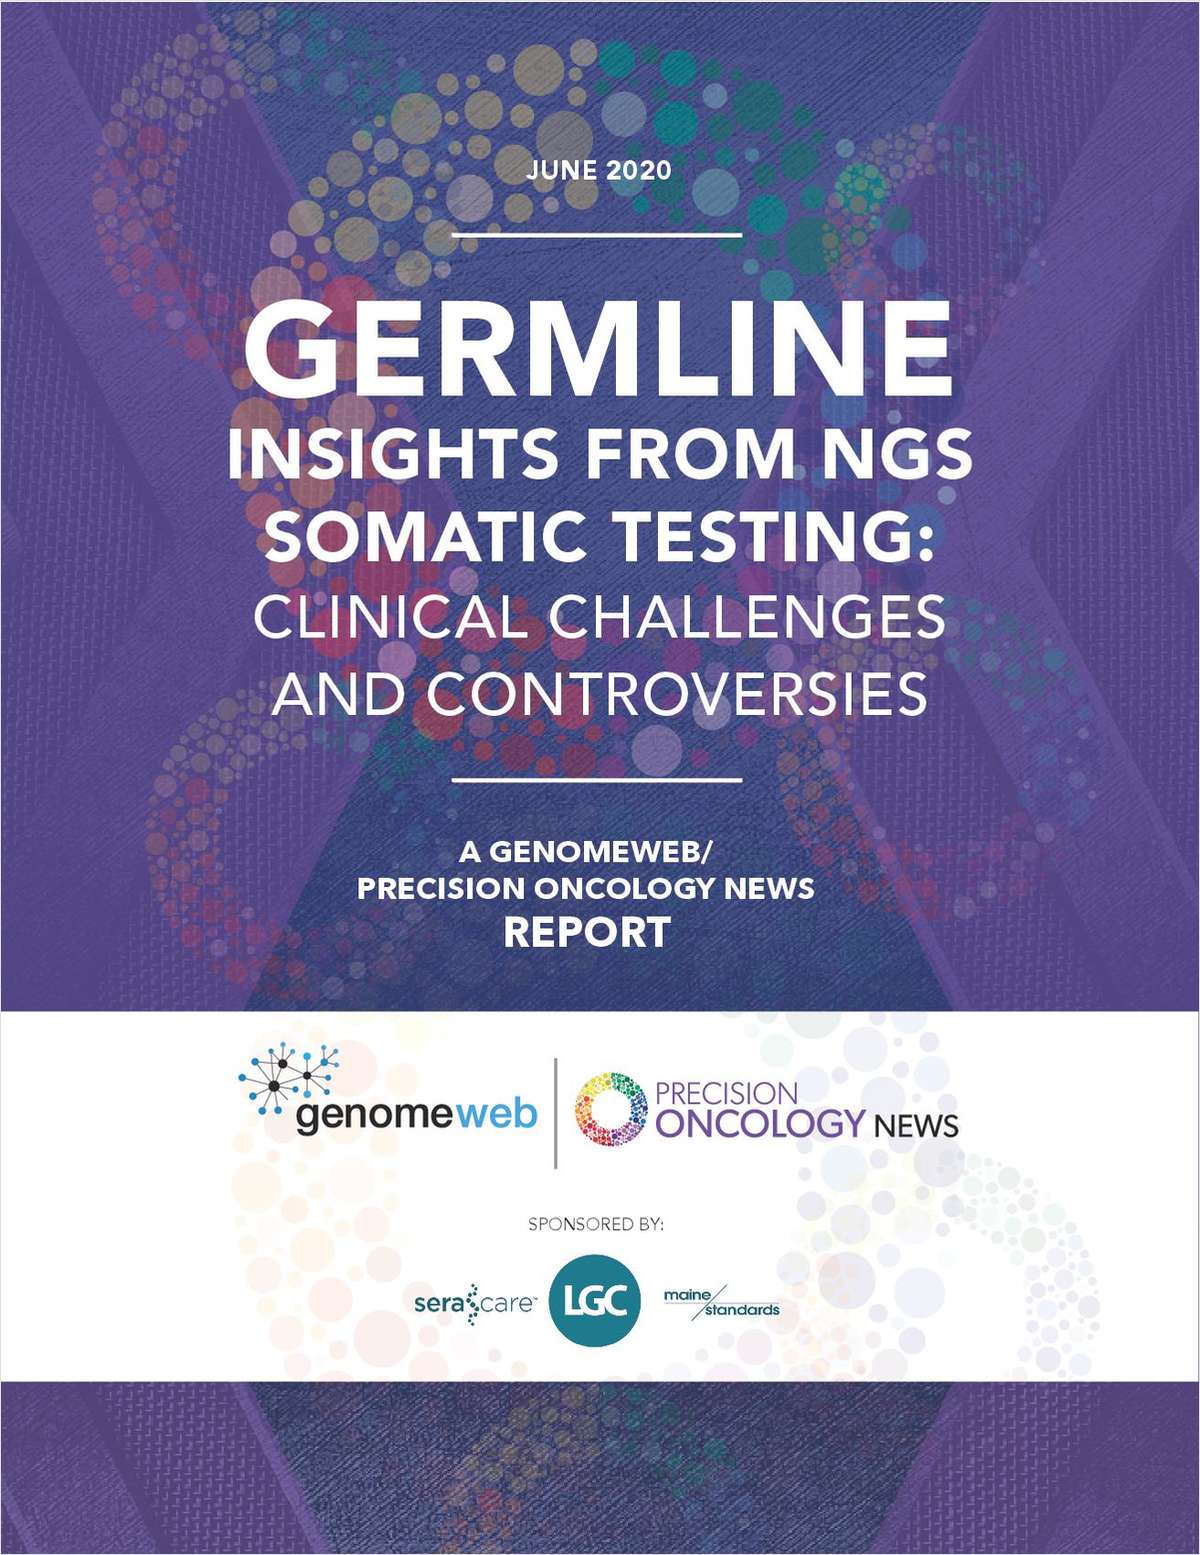 Germline Insights from NGS Somatic Testing: Clinical Challenges and Controversies A Precision Oncology News Report